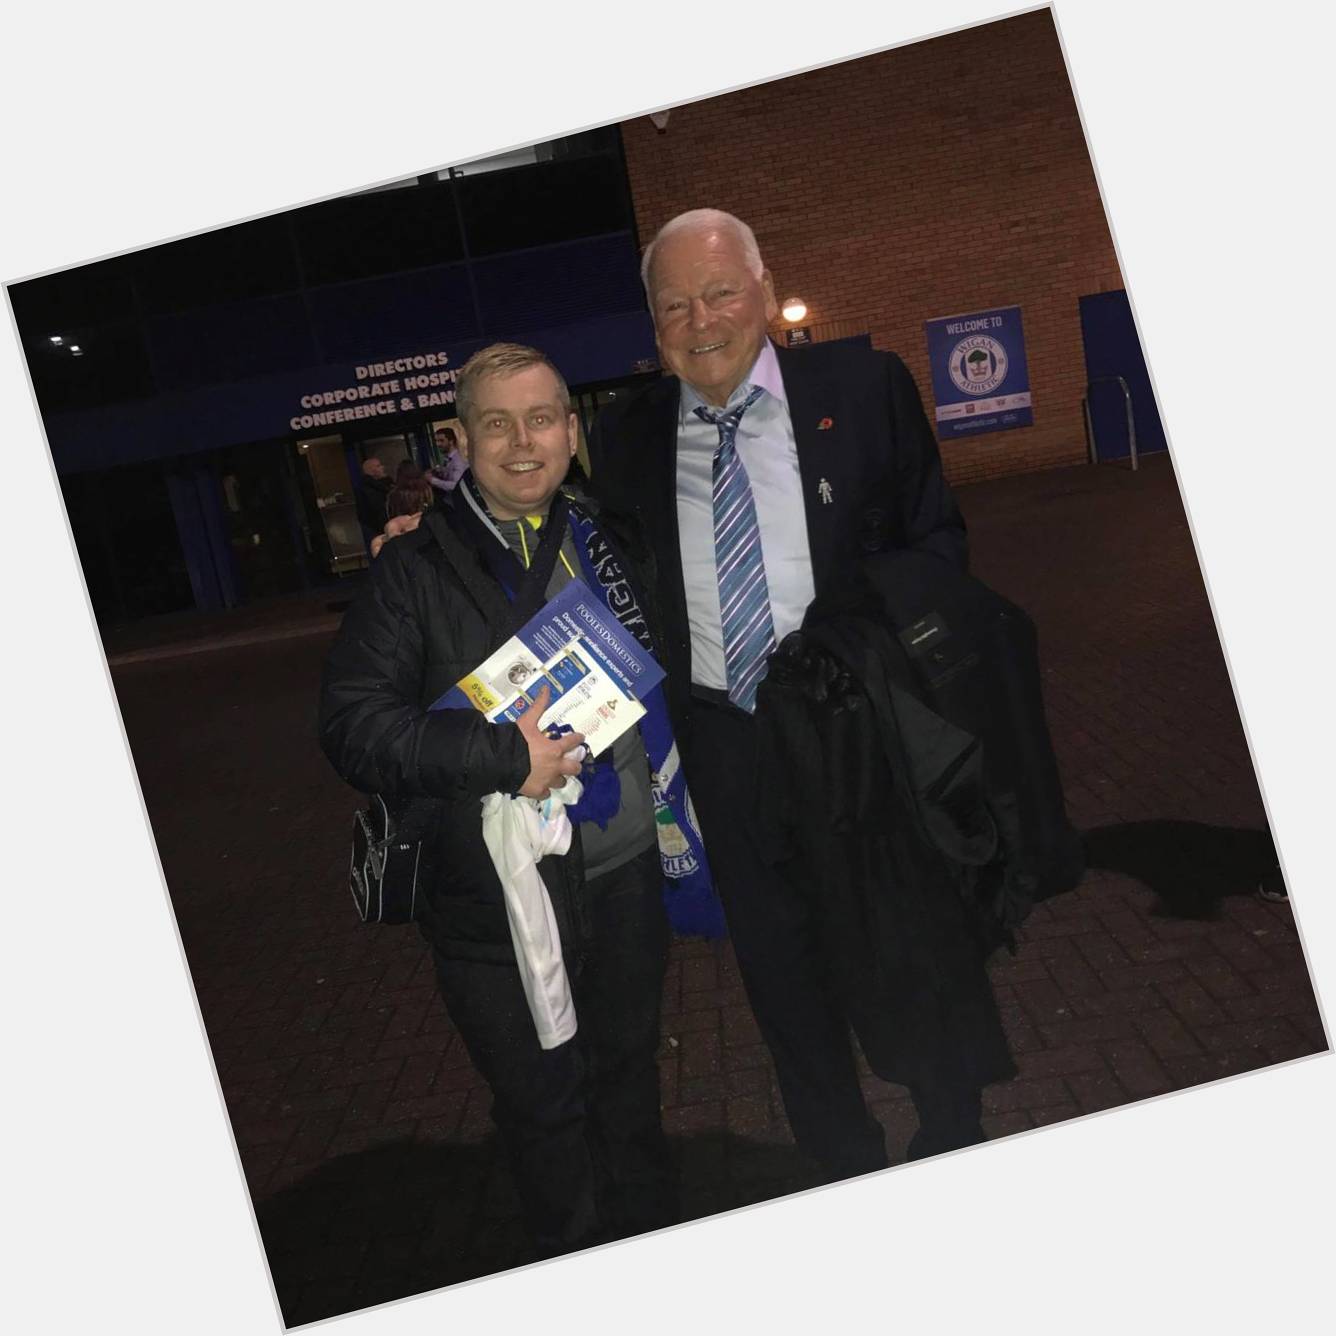   A big Happy Birthday to Dave Whelan, 81 today!      